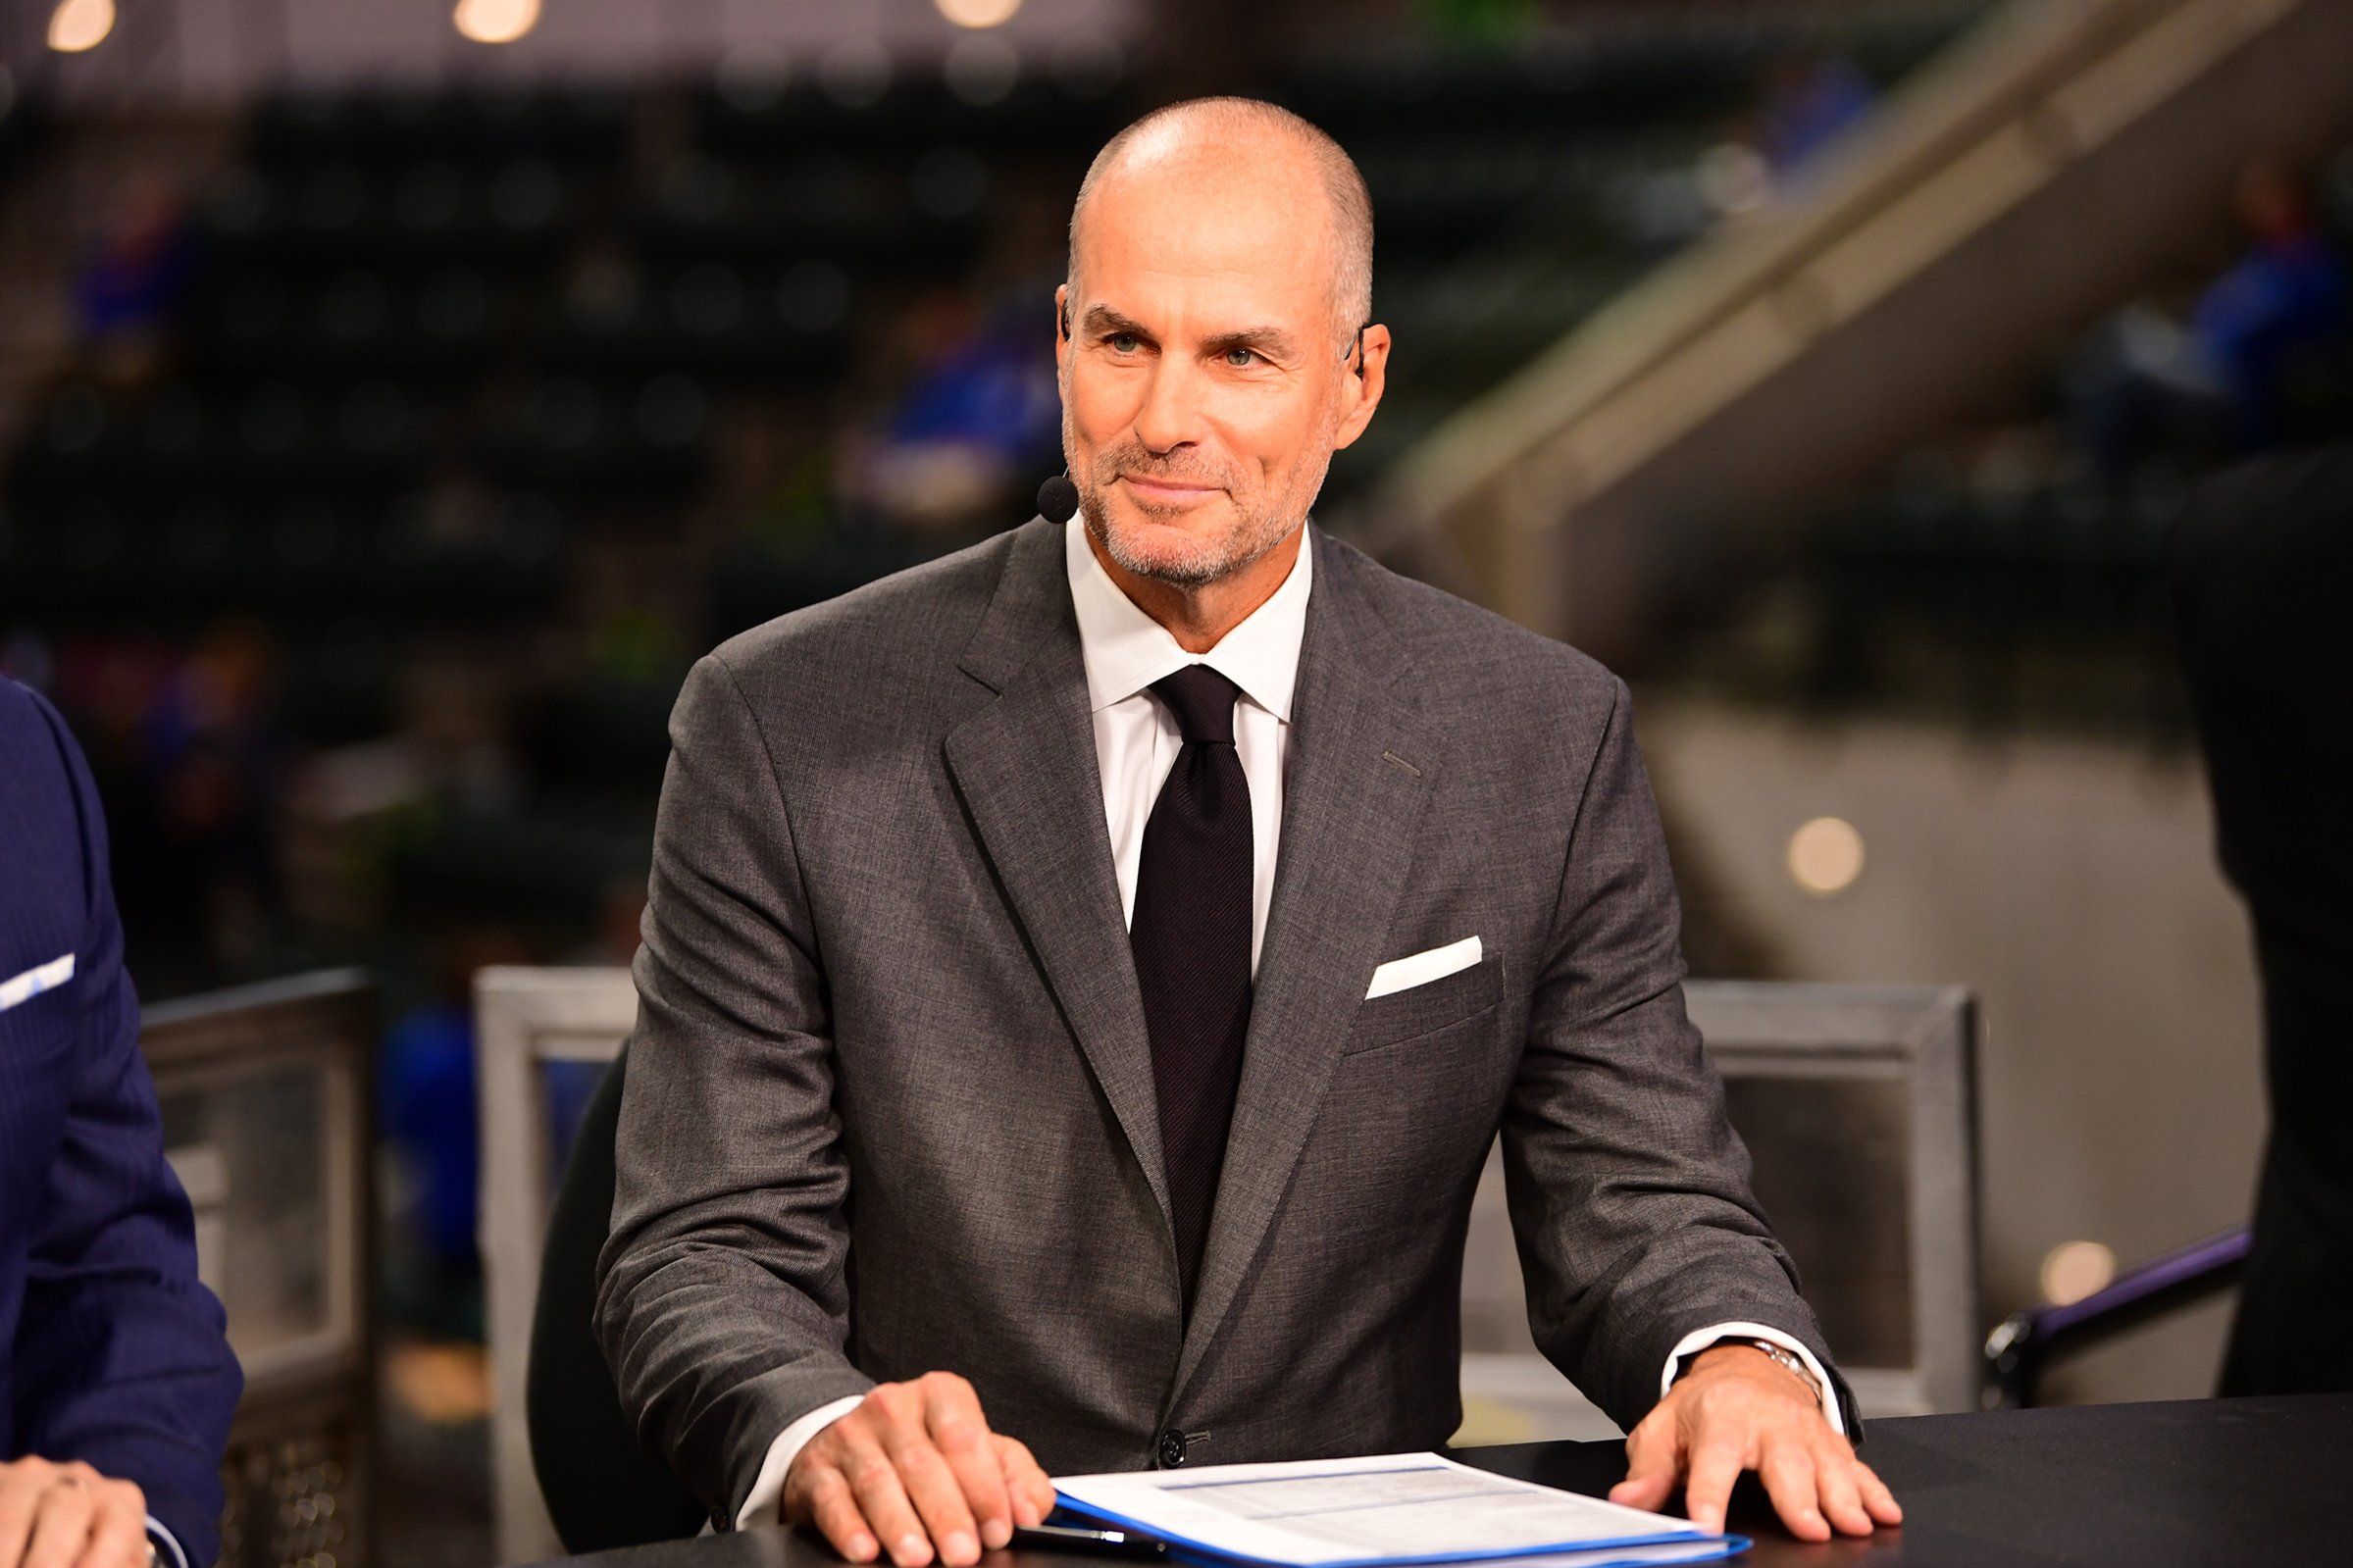 ‘The idea that the free market works for the entire world, save the athletes, is ludicrous.’ —Jay Bilas